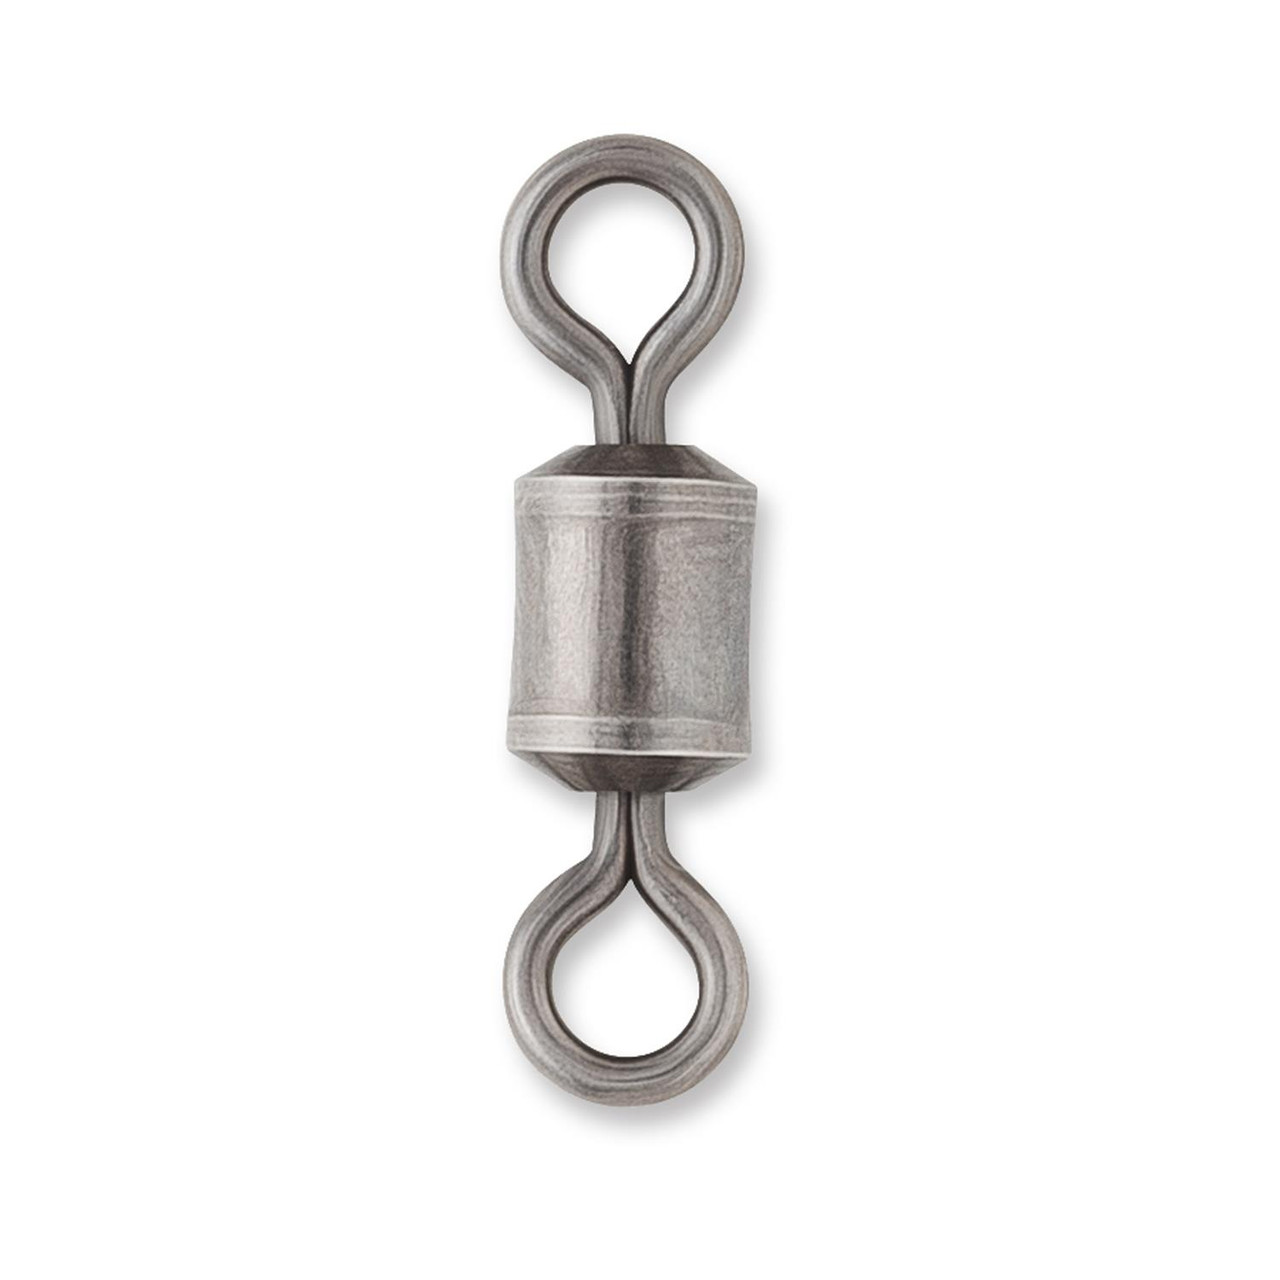 VMC Stainless Steel HD Ball Bearing Swivel with Welded Rings - Buy 1 Get 2  Free or Buy 3 Get 8 Free